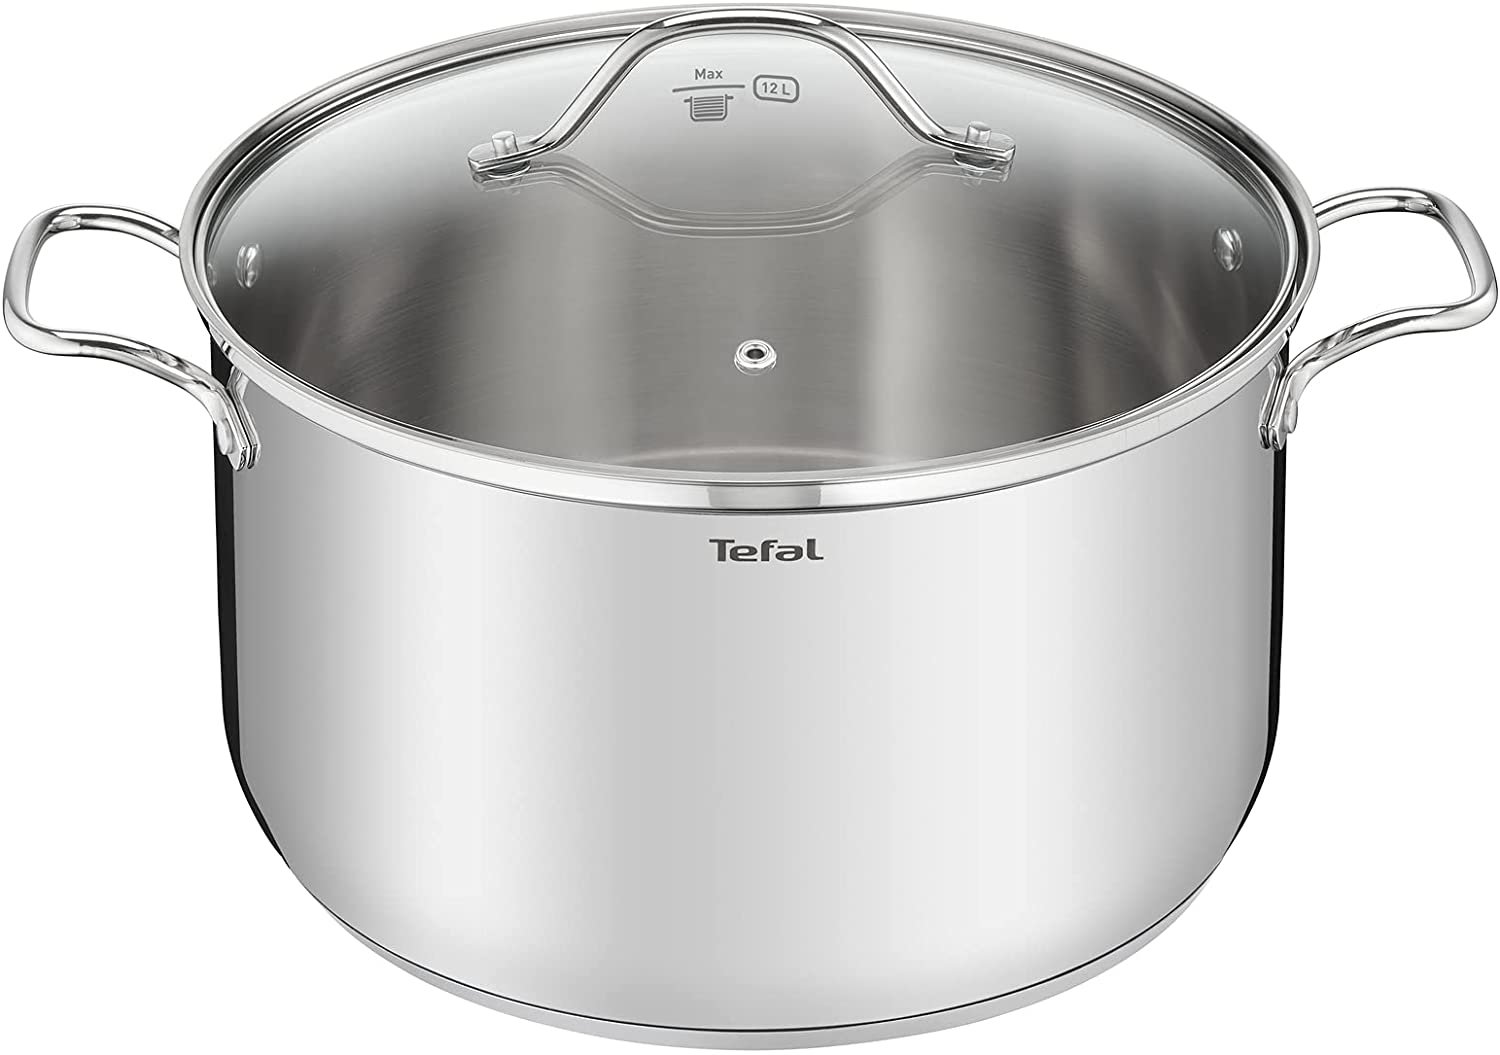 Tefal large 9.8l stockpot in silver.